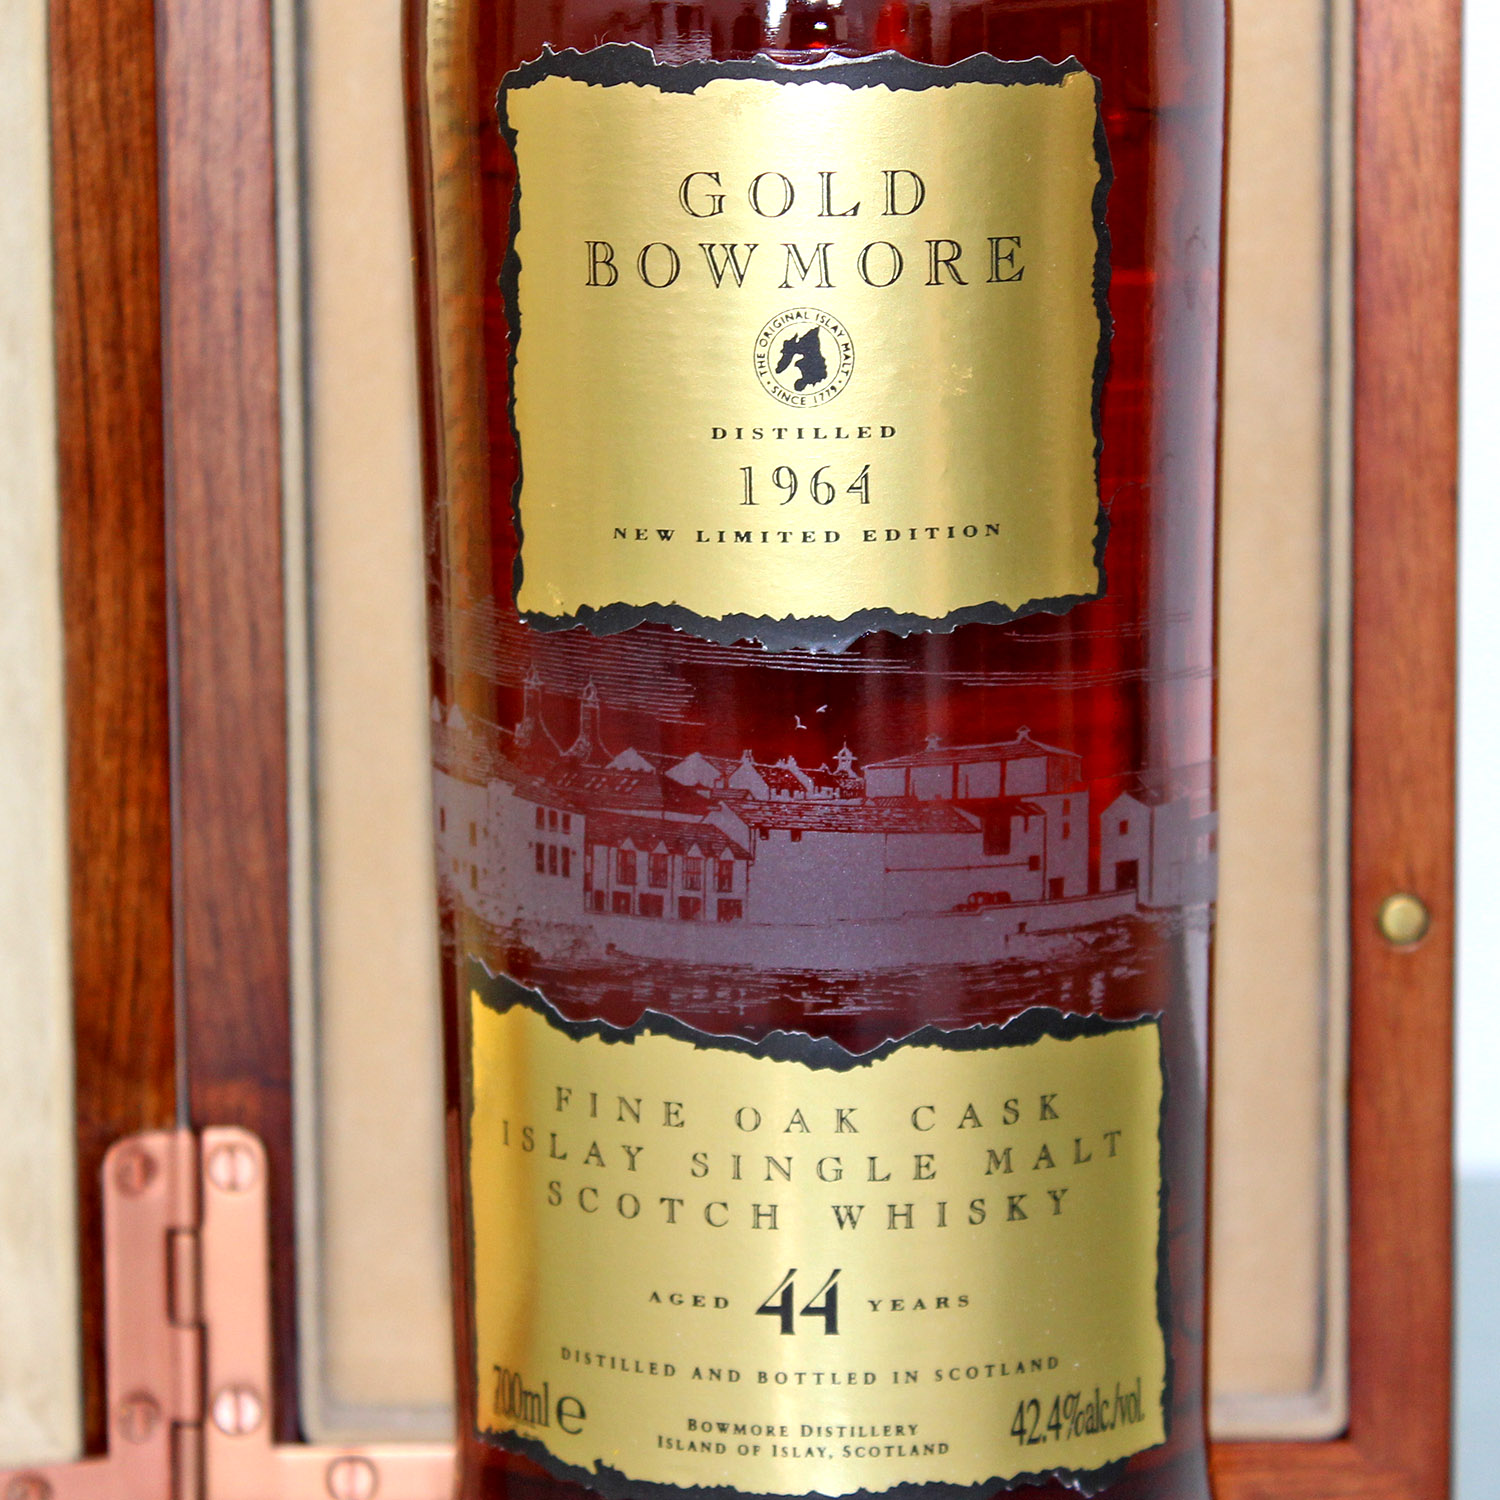 Gold Bowmore 1964 44 Years The Trilogy label